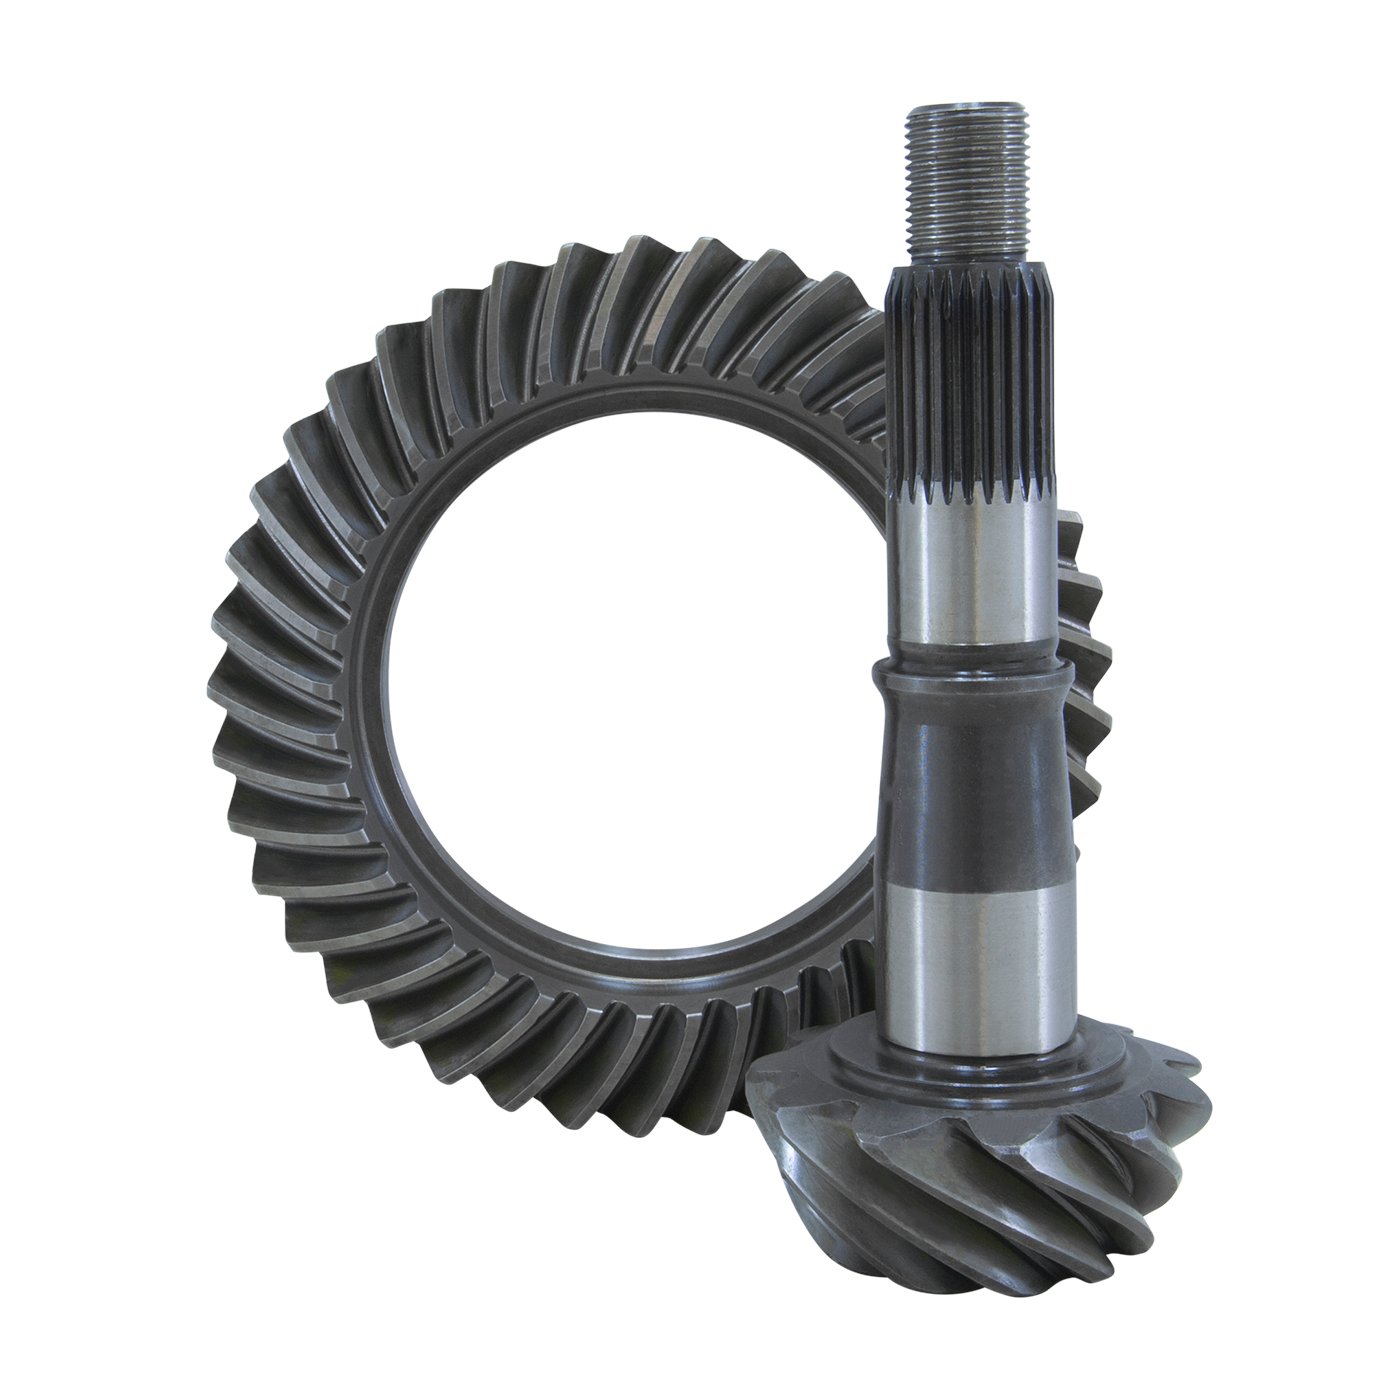 USA Standard ZG GM7.5-342 Ring & Pinion Gear Set, For GM 7.5 in., 3.42 Ratio